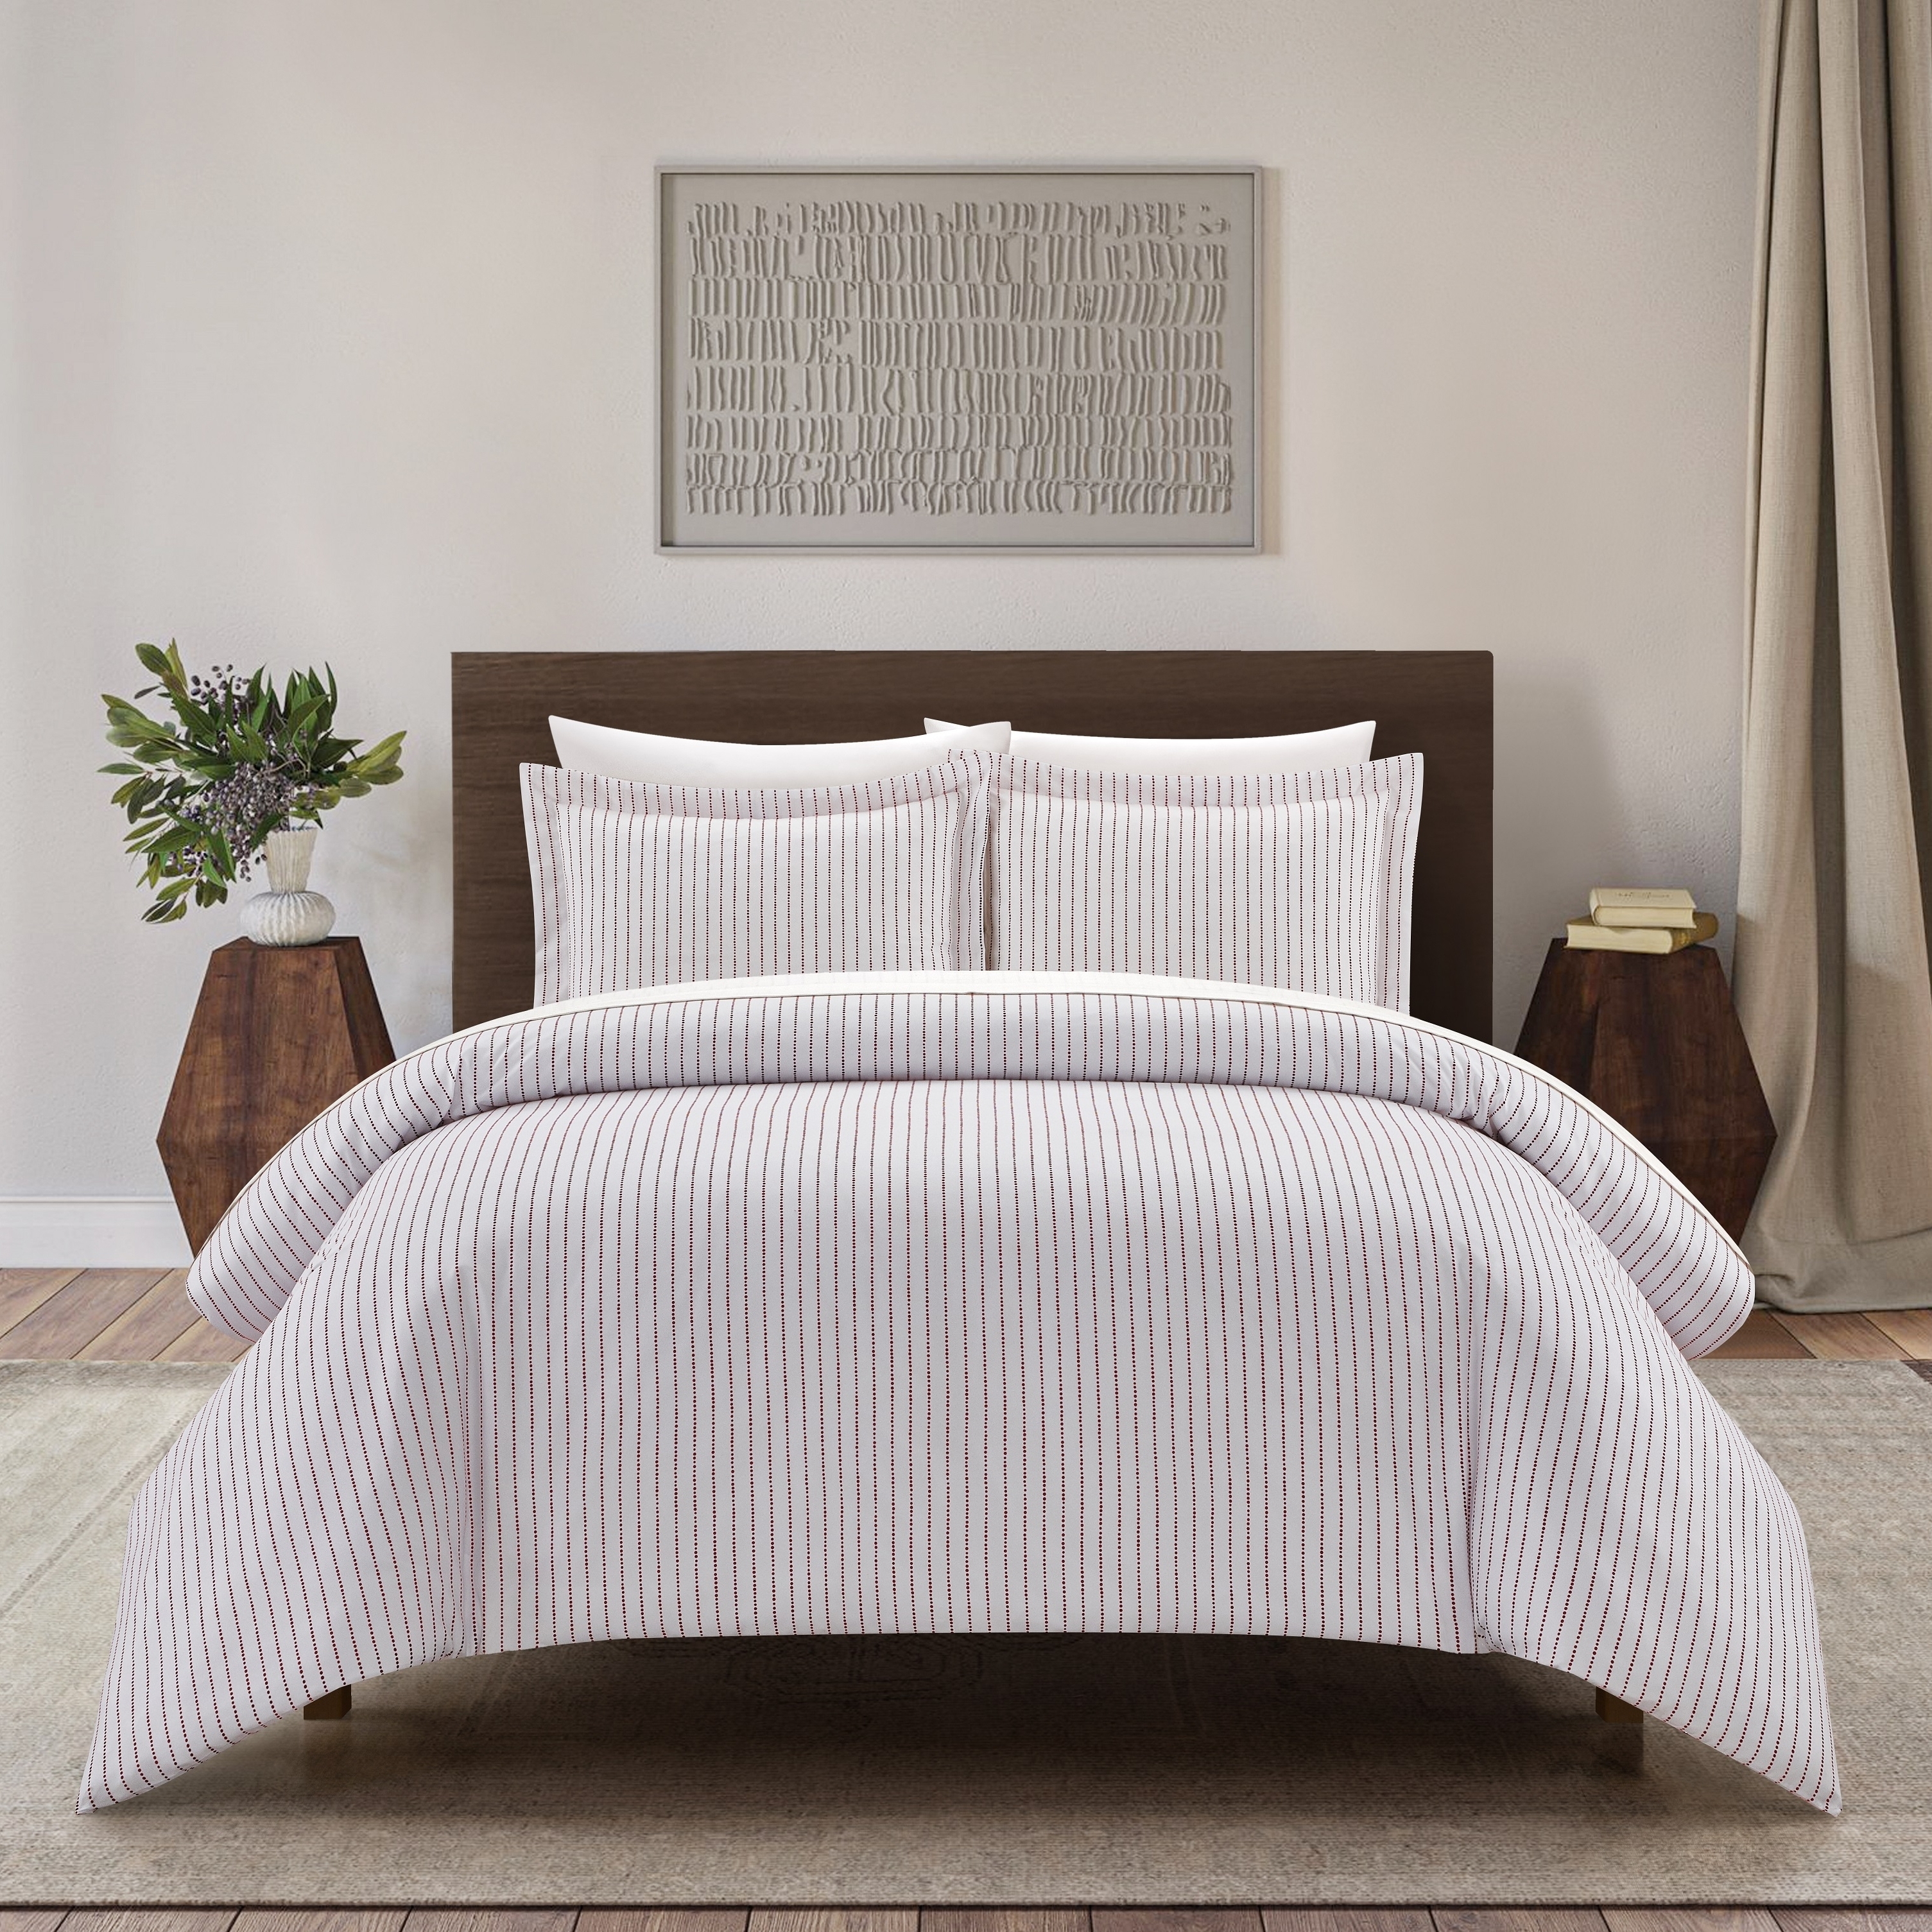 Vasey 2 Or 3 Piece Duvet Cover Set Contemporary Solid White With Dot Striped - Charcoal, Queen